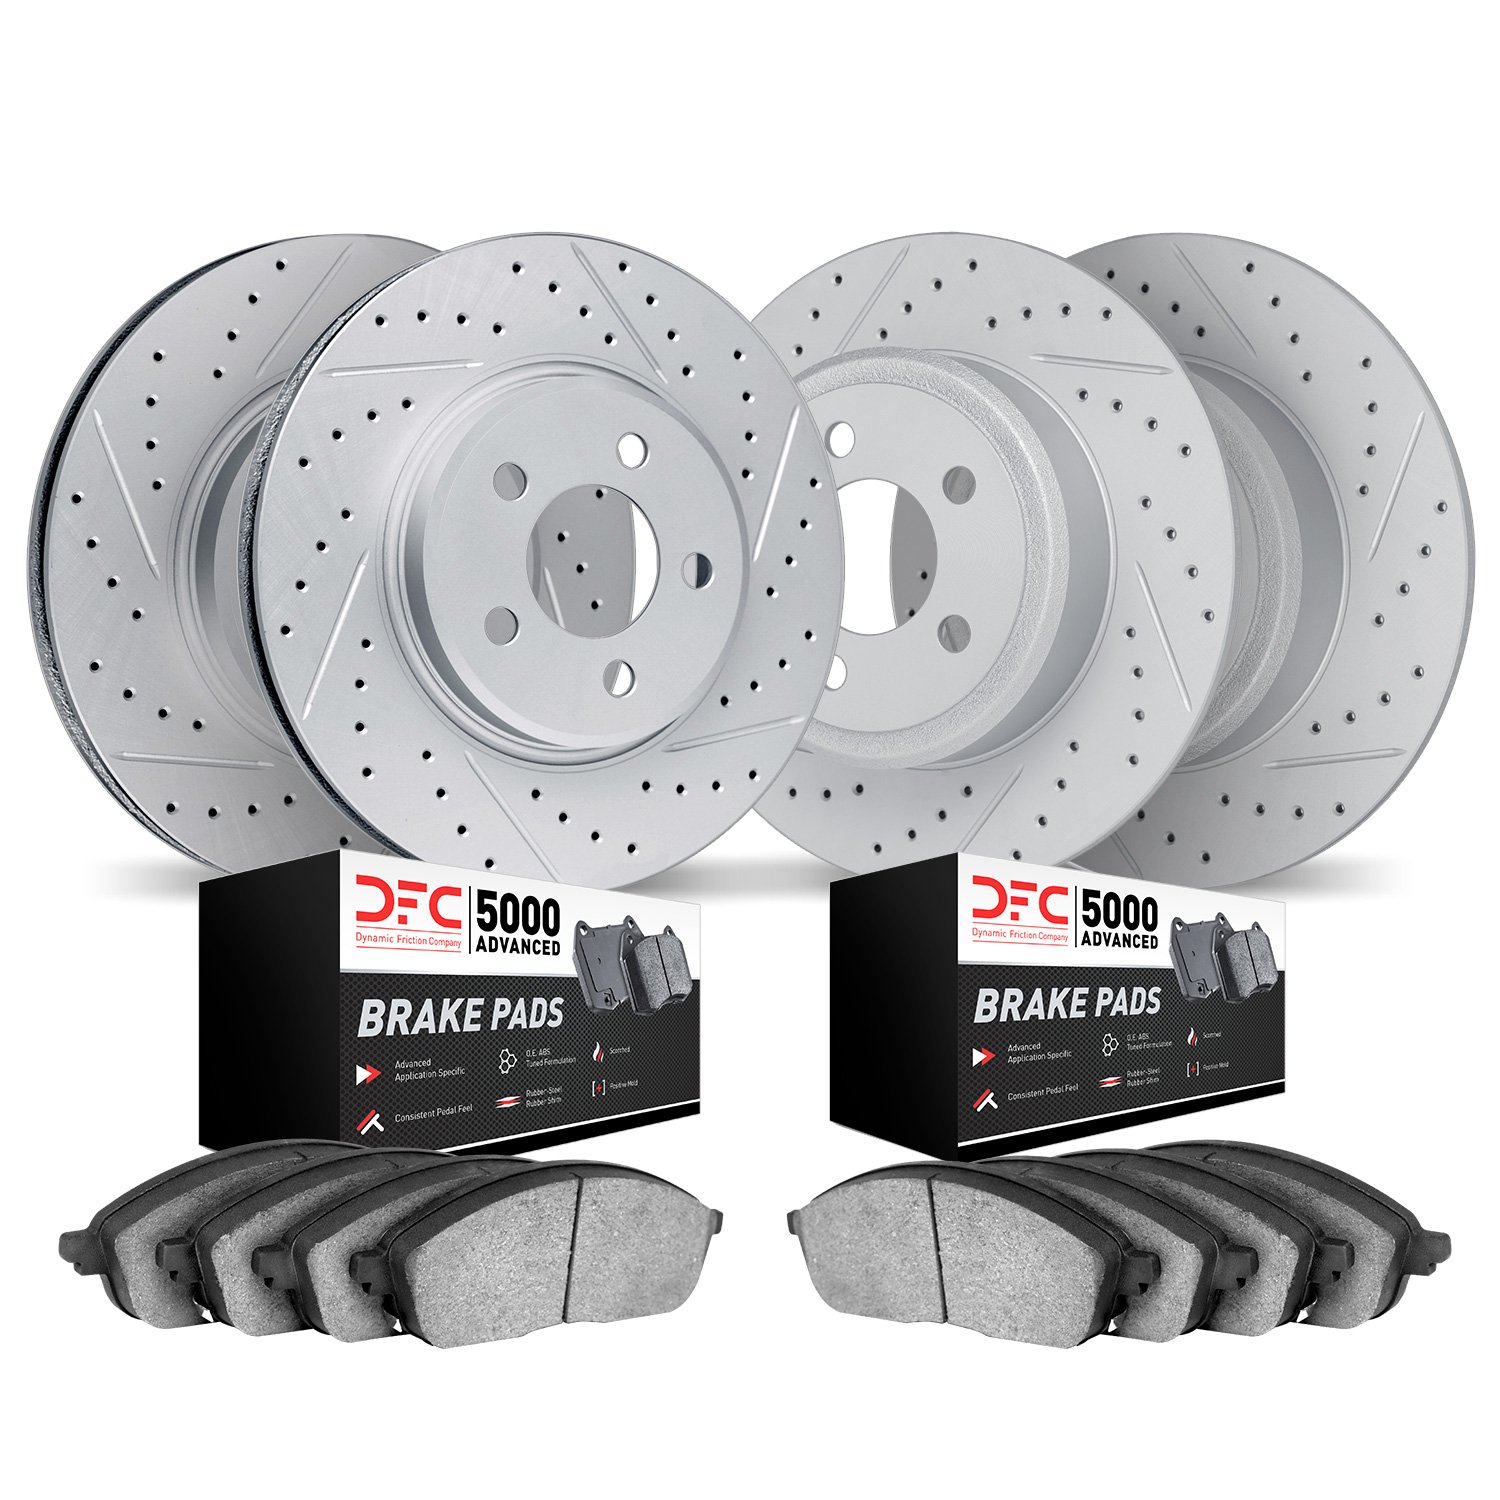 2504-54262 Geoperformance Drilled/Slotted Rotors w/5000 Advanced Brake Pads Kit, 2006-2010 Ford/Lincoln/Mercury/Mazda, Position: